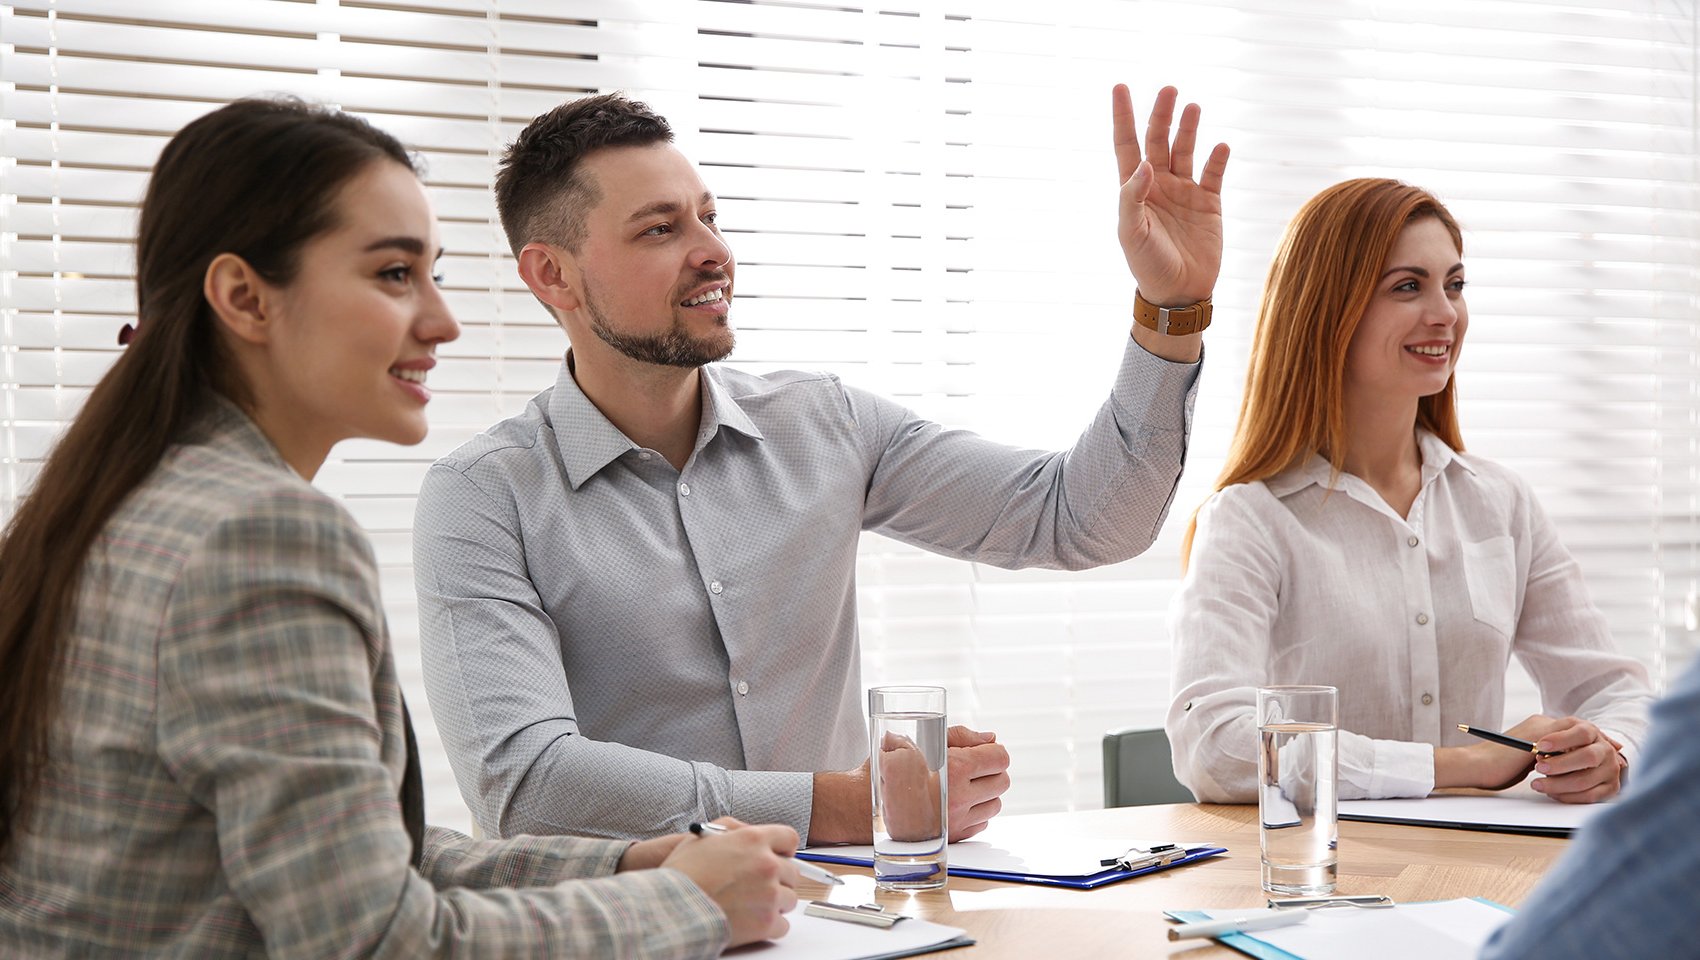 Man raising hand to ask question at business training in conference room